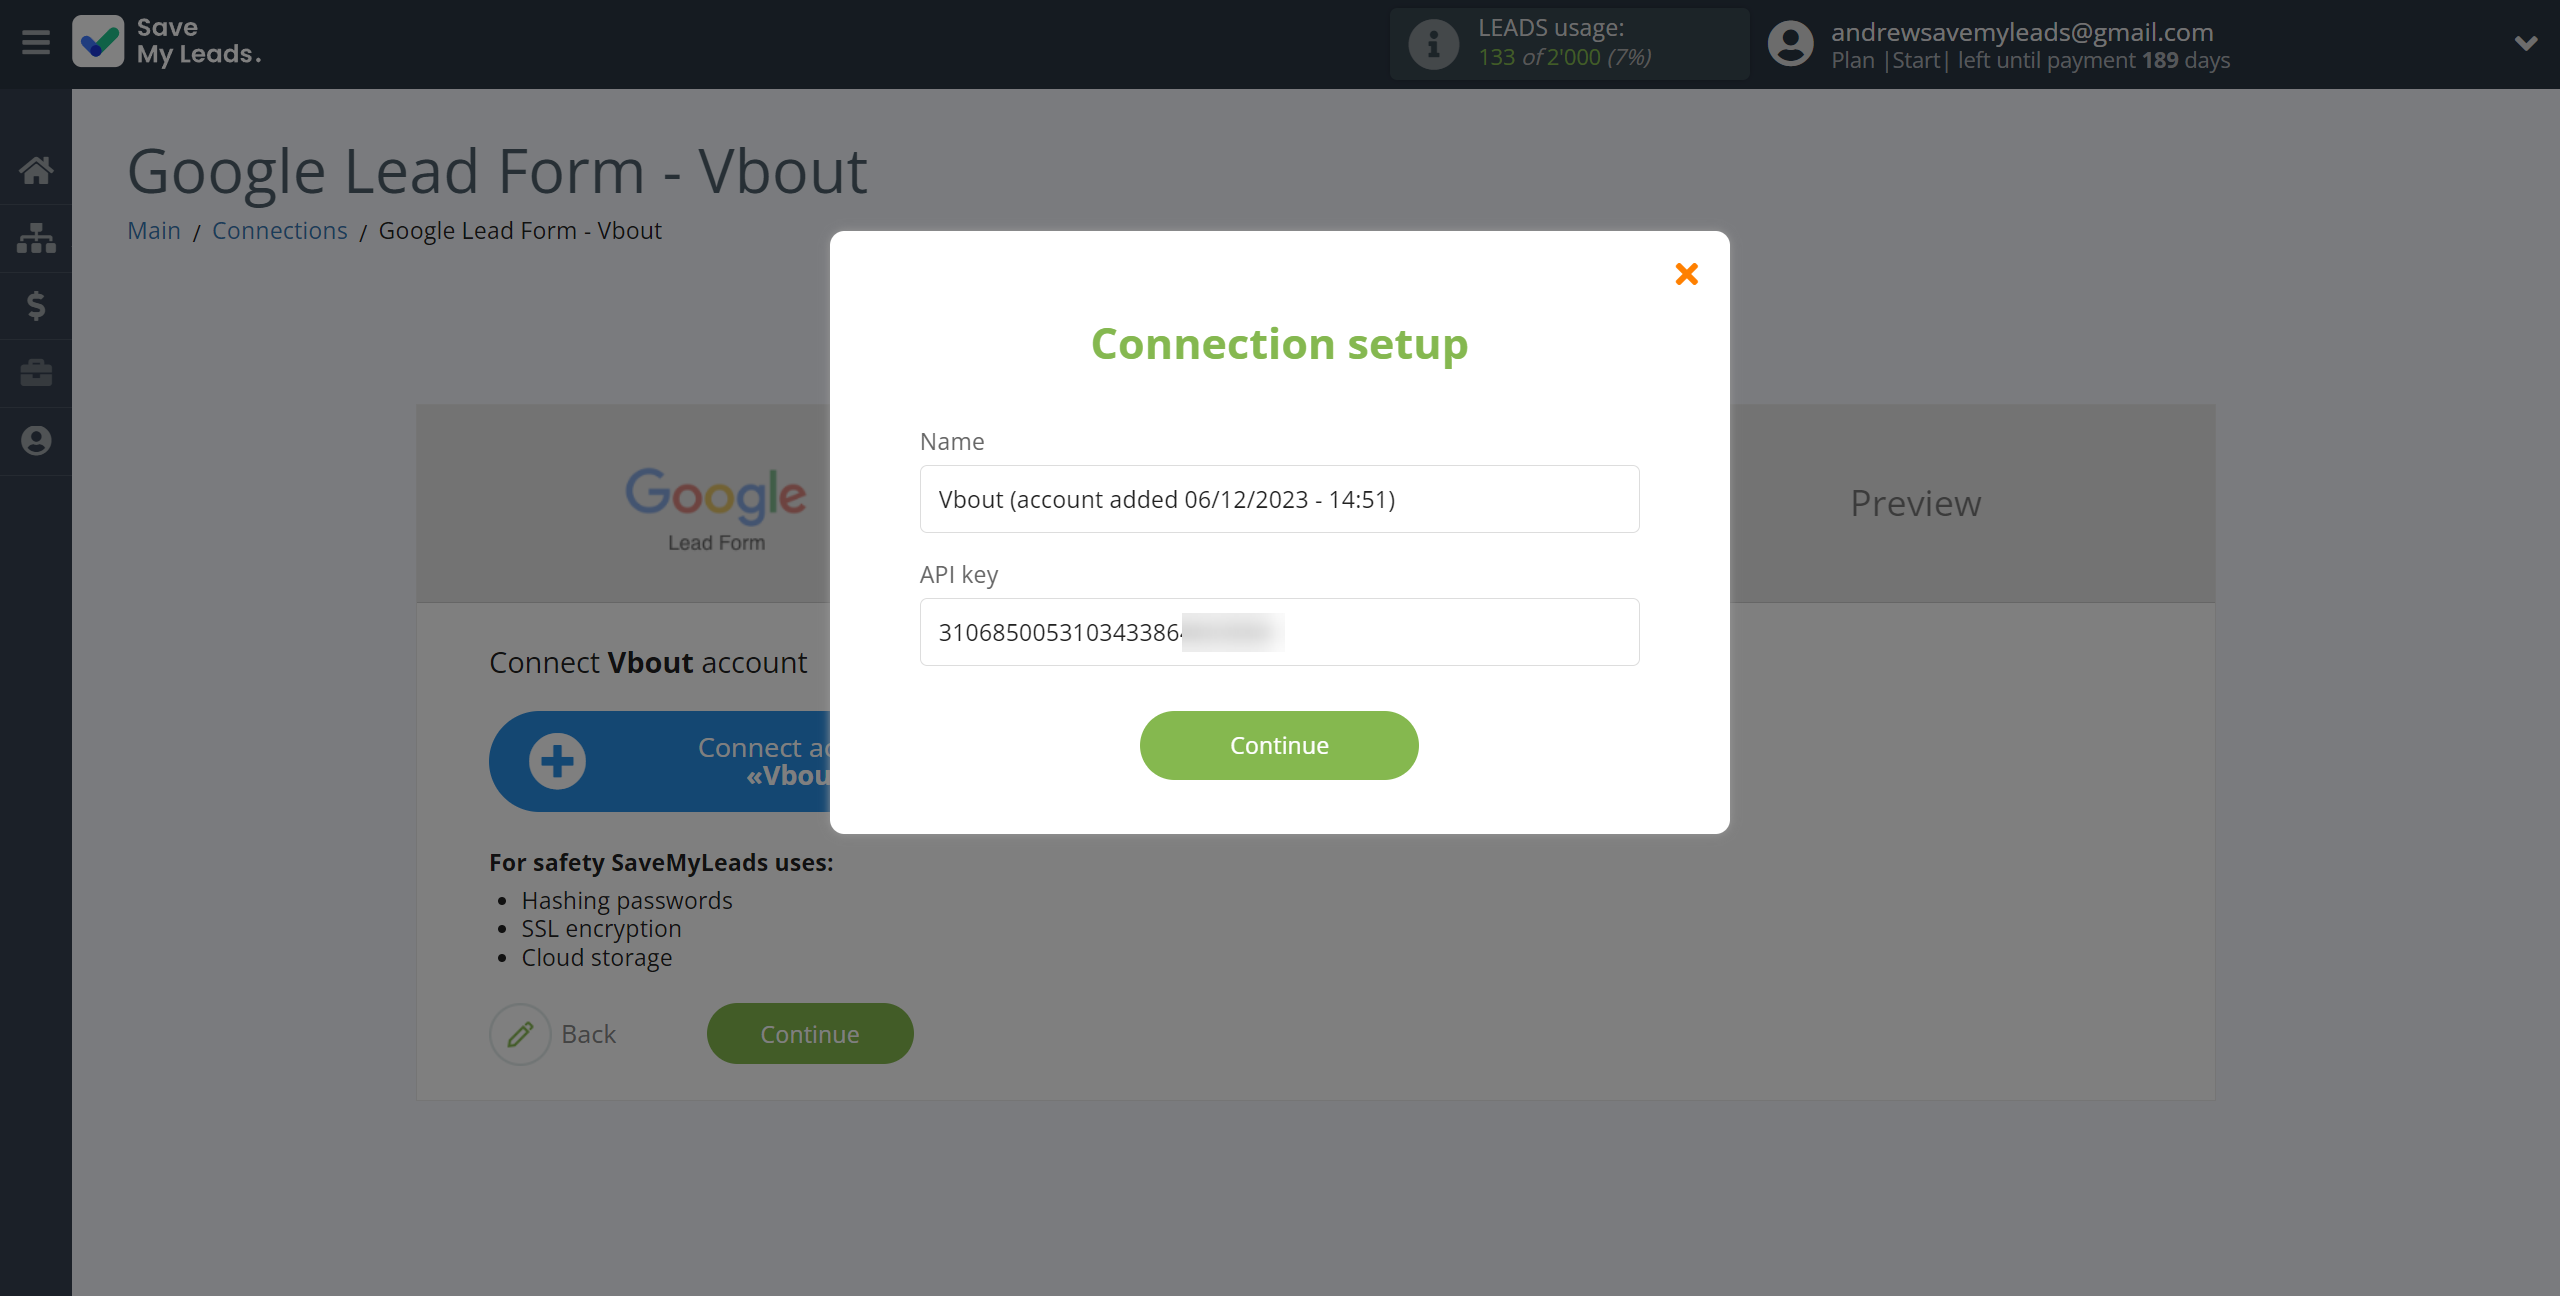 How to Connect Google Lead Form with Vbout Add Contact | Data Destination account connection